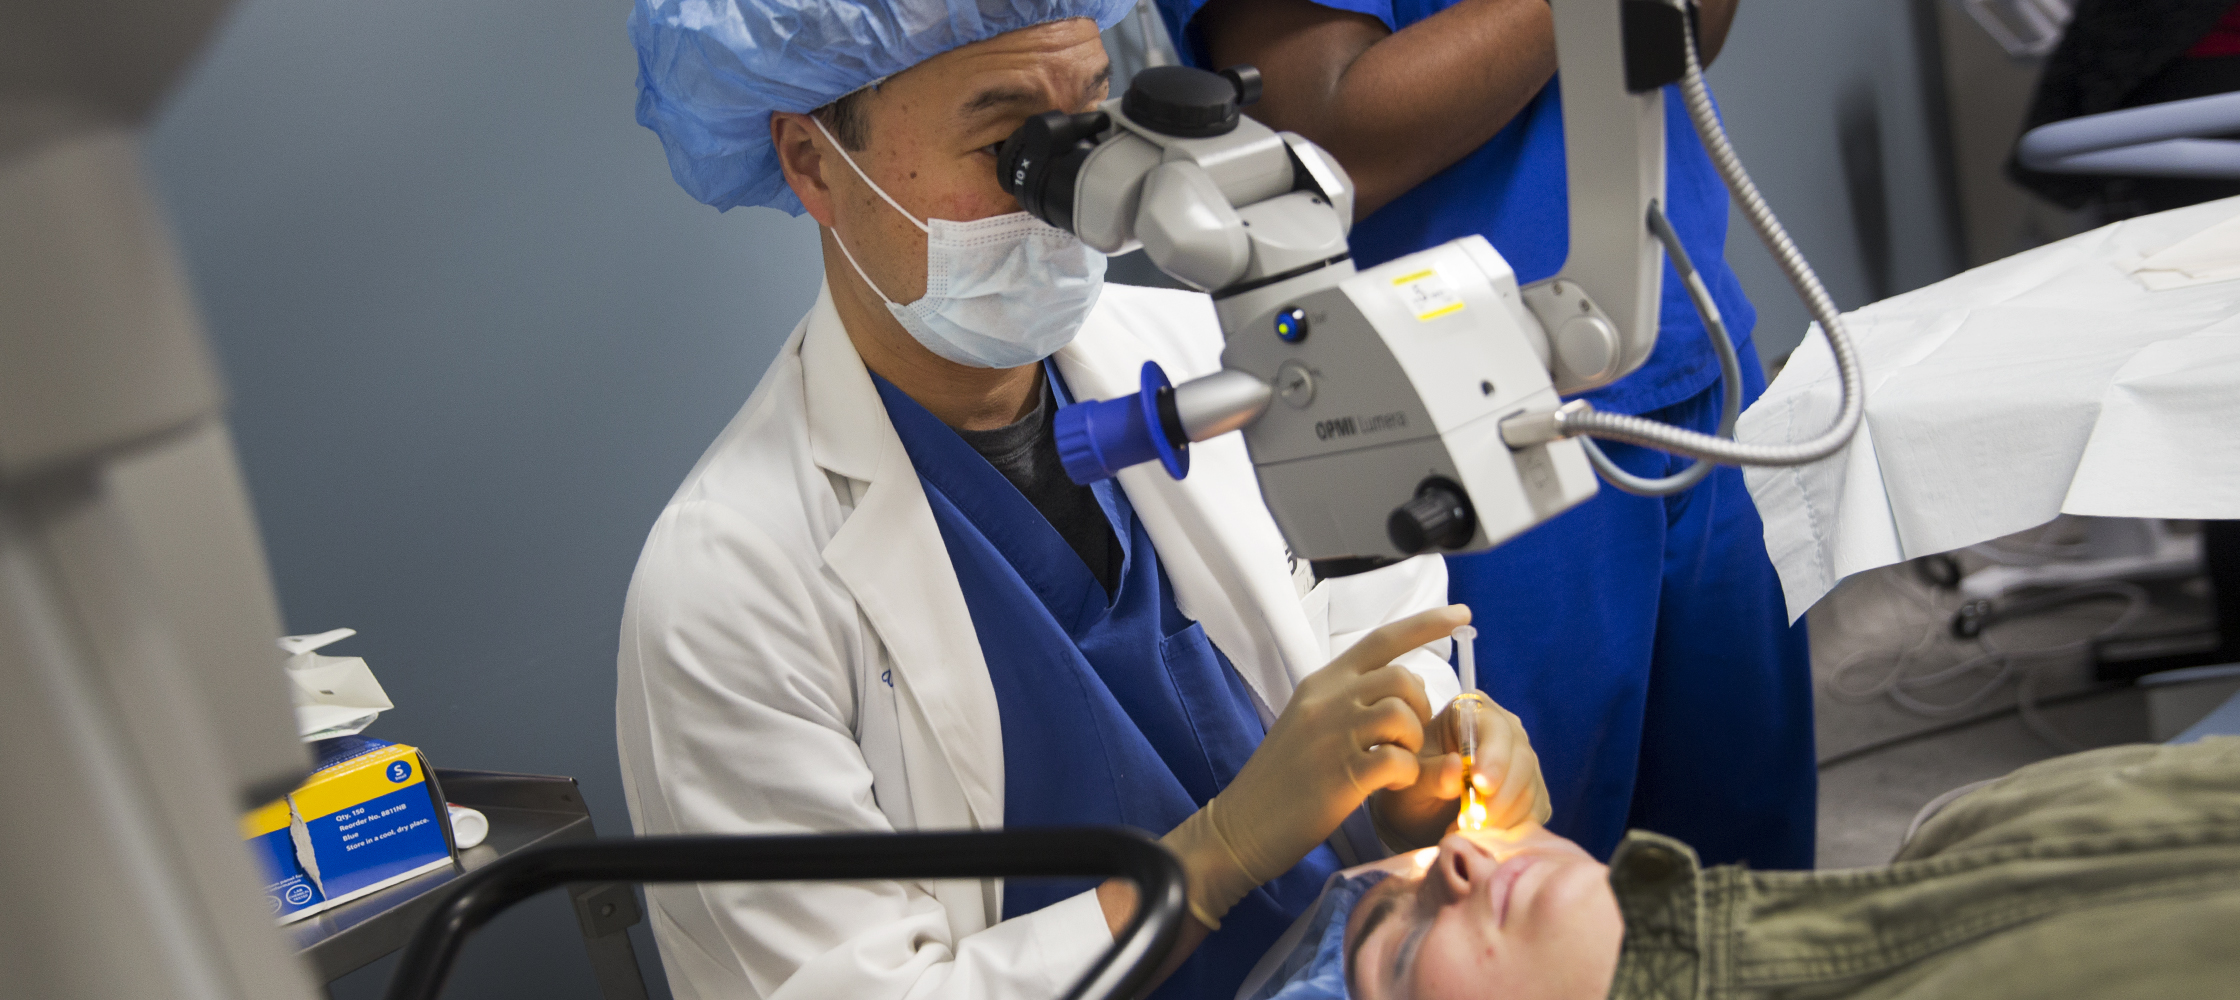 Duke corneal specialist Terry Kim, MD, administers collagen cross-linking treatment